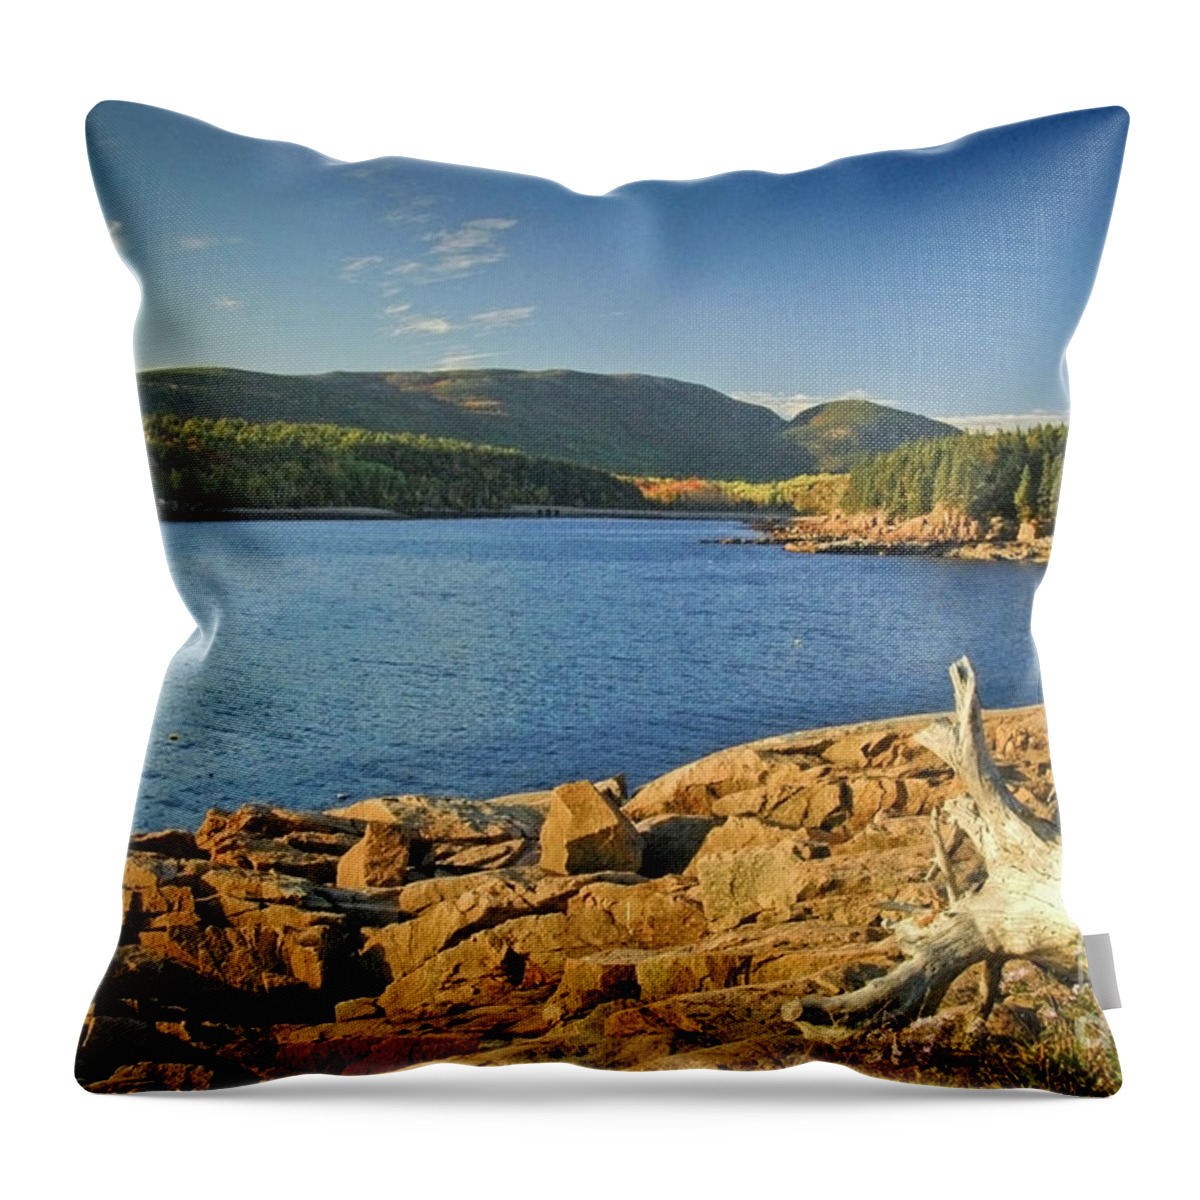 Acadia National Park Throw Pillow featuring the photograph Acadia Otter Cove by Alana Ranney